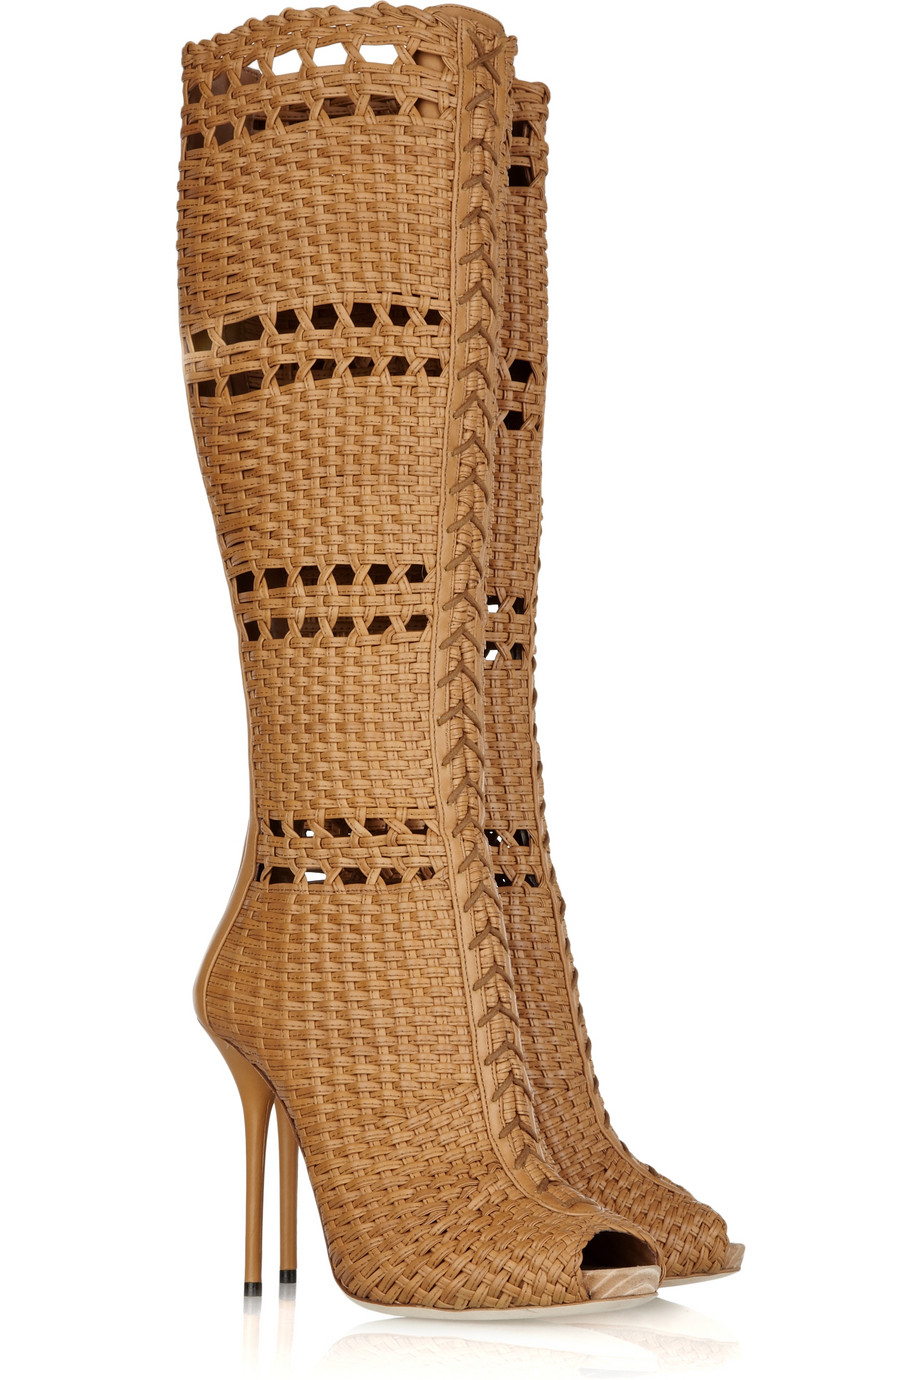 Lyst - Gucci Woven Leather Boots in Brown